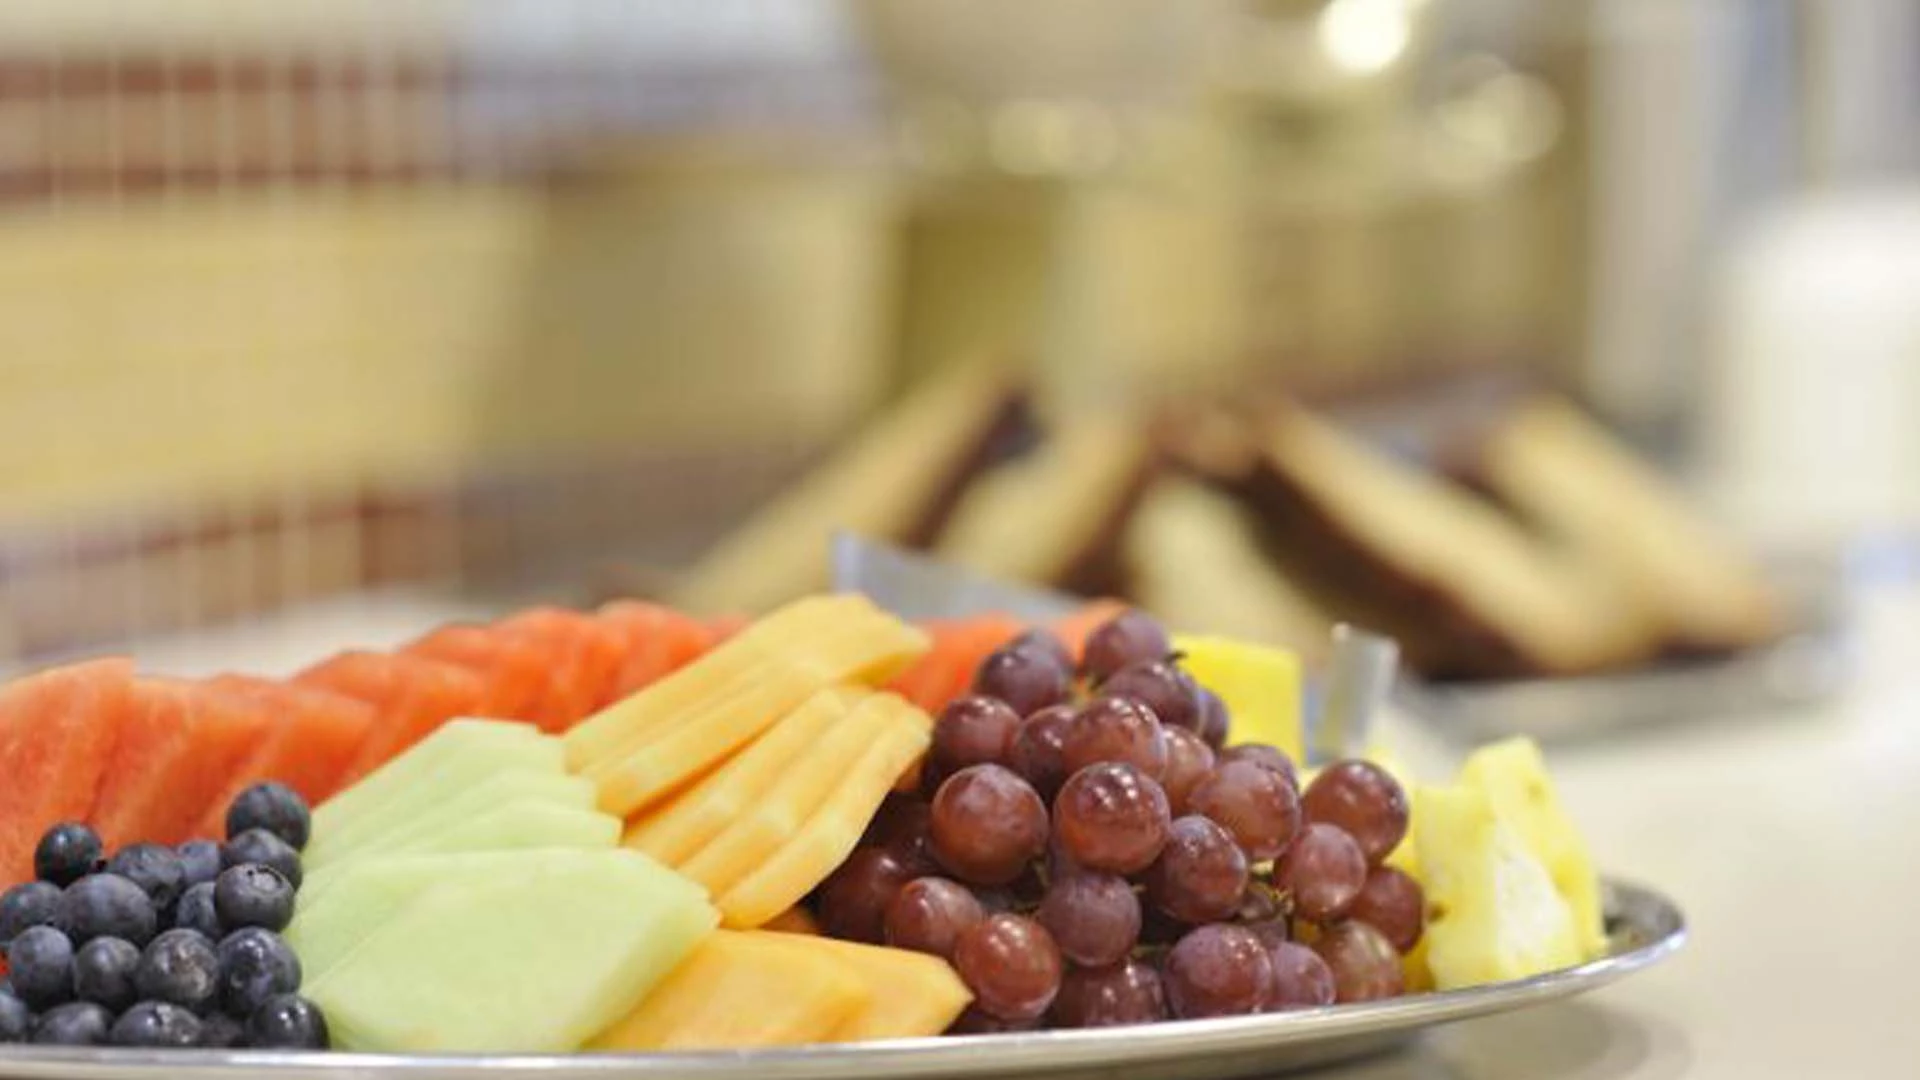 A fruit tray with melons, grapes, berries, and pineapple, Soft snacks for elderly